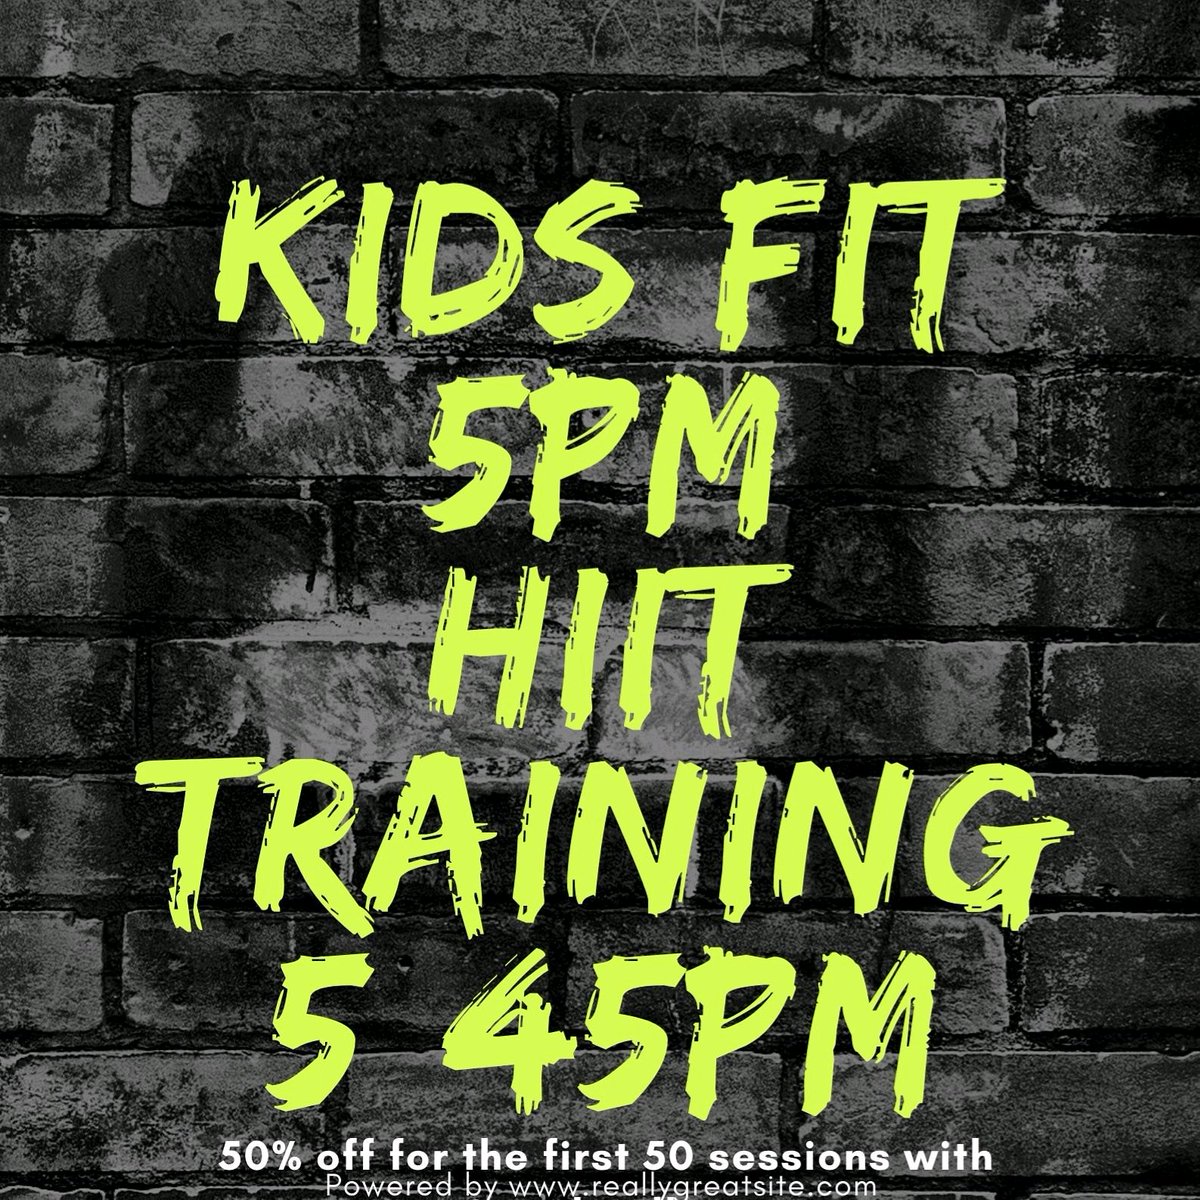 Todays classes: book online or just drop us a message. #childrensfitness #health #exercise #fitnessgoal #damiangilderptweightloss #lifestyleblogger #personaltraining #womansclasses #lifestyle #HealthyLiving #healthy #oldhamhour #healthynation #damiangilderptweightloss